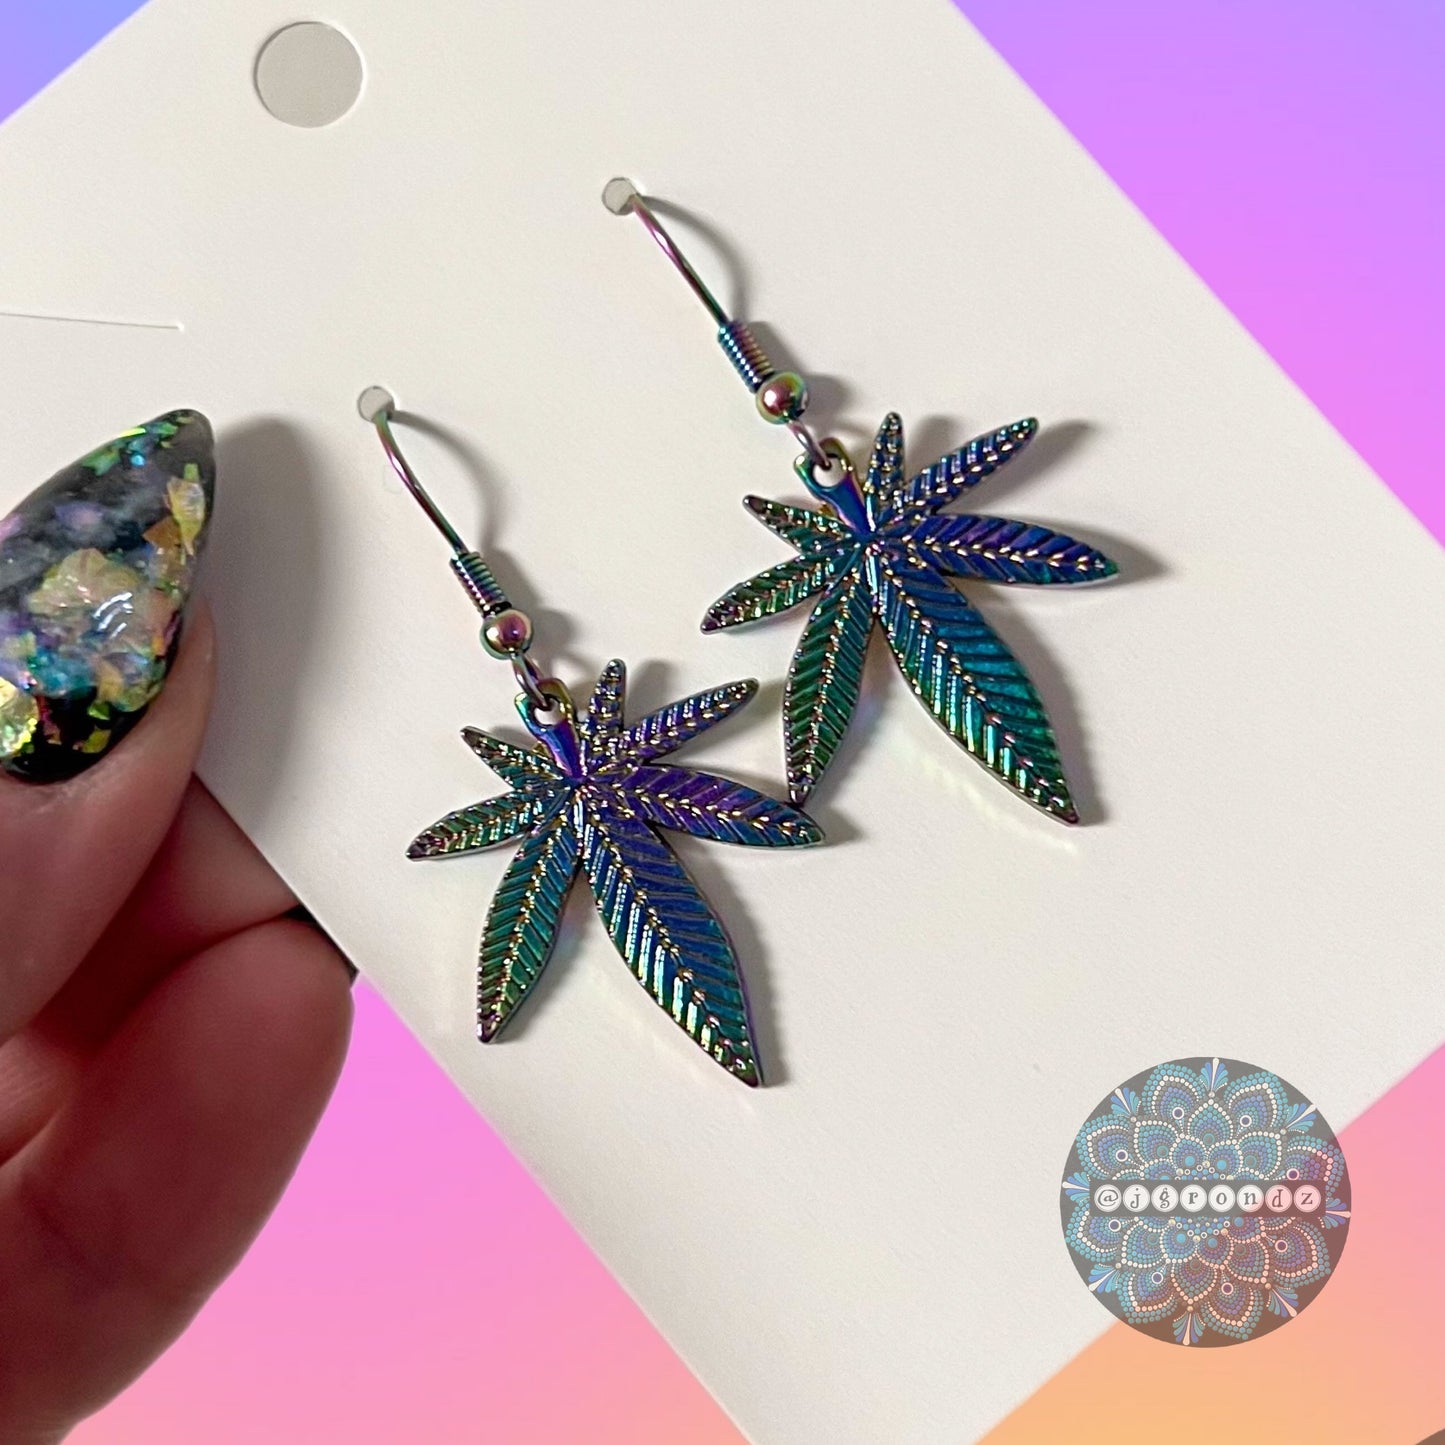 Rainbow Weed Leaf Earrings With Stainless Steel Fish Hook Ear Wire